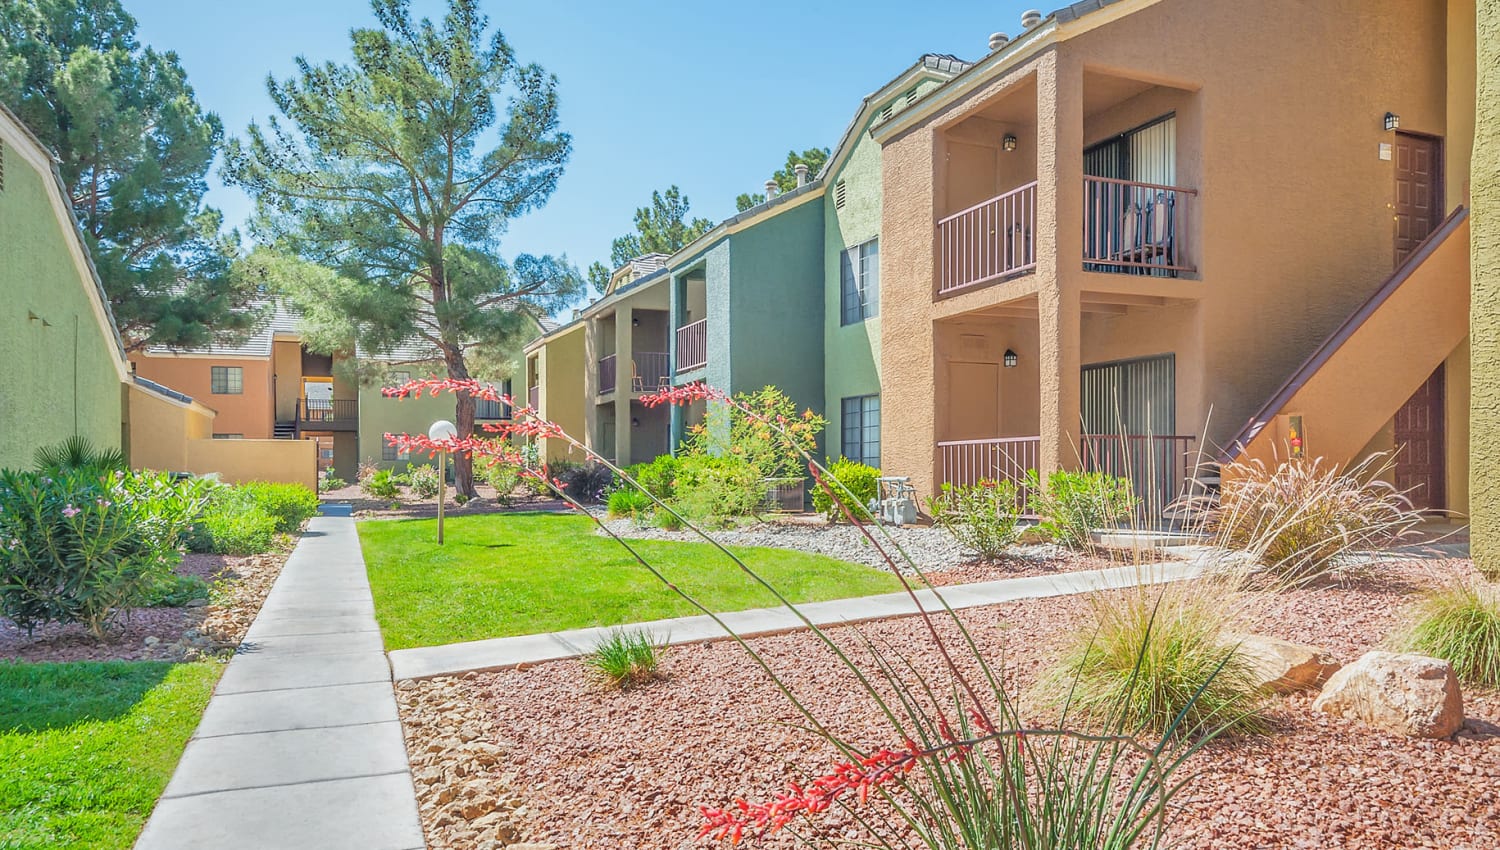 Perfect balance of green grass and desert landscaping throughout our community at Shelter Cove Apartments in Las Vegas, Nevada